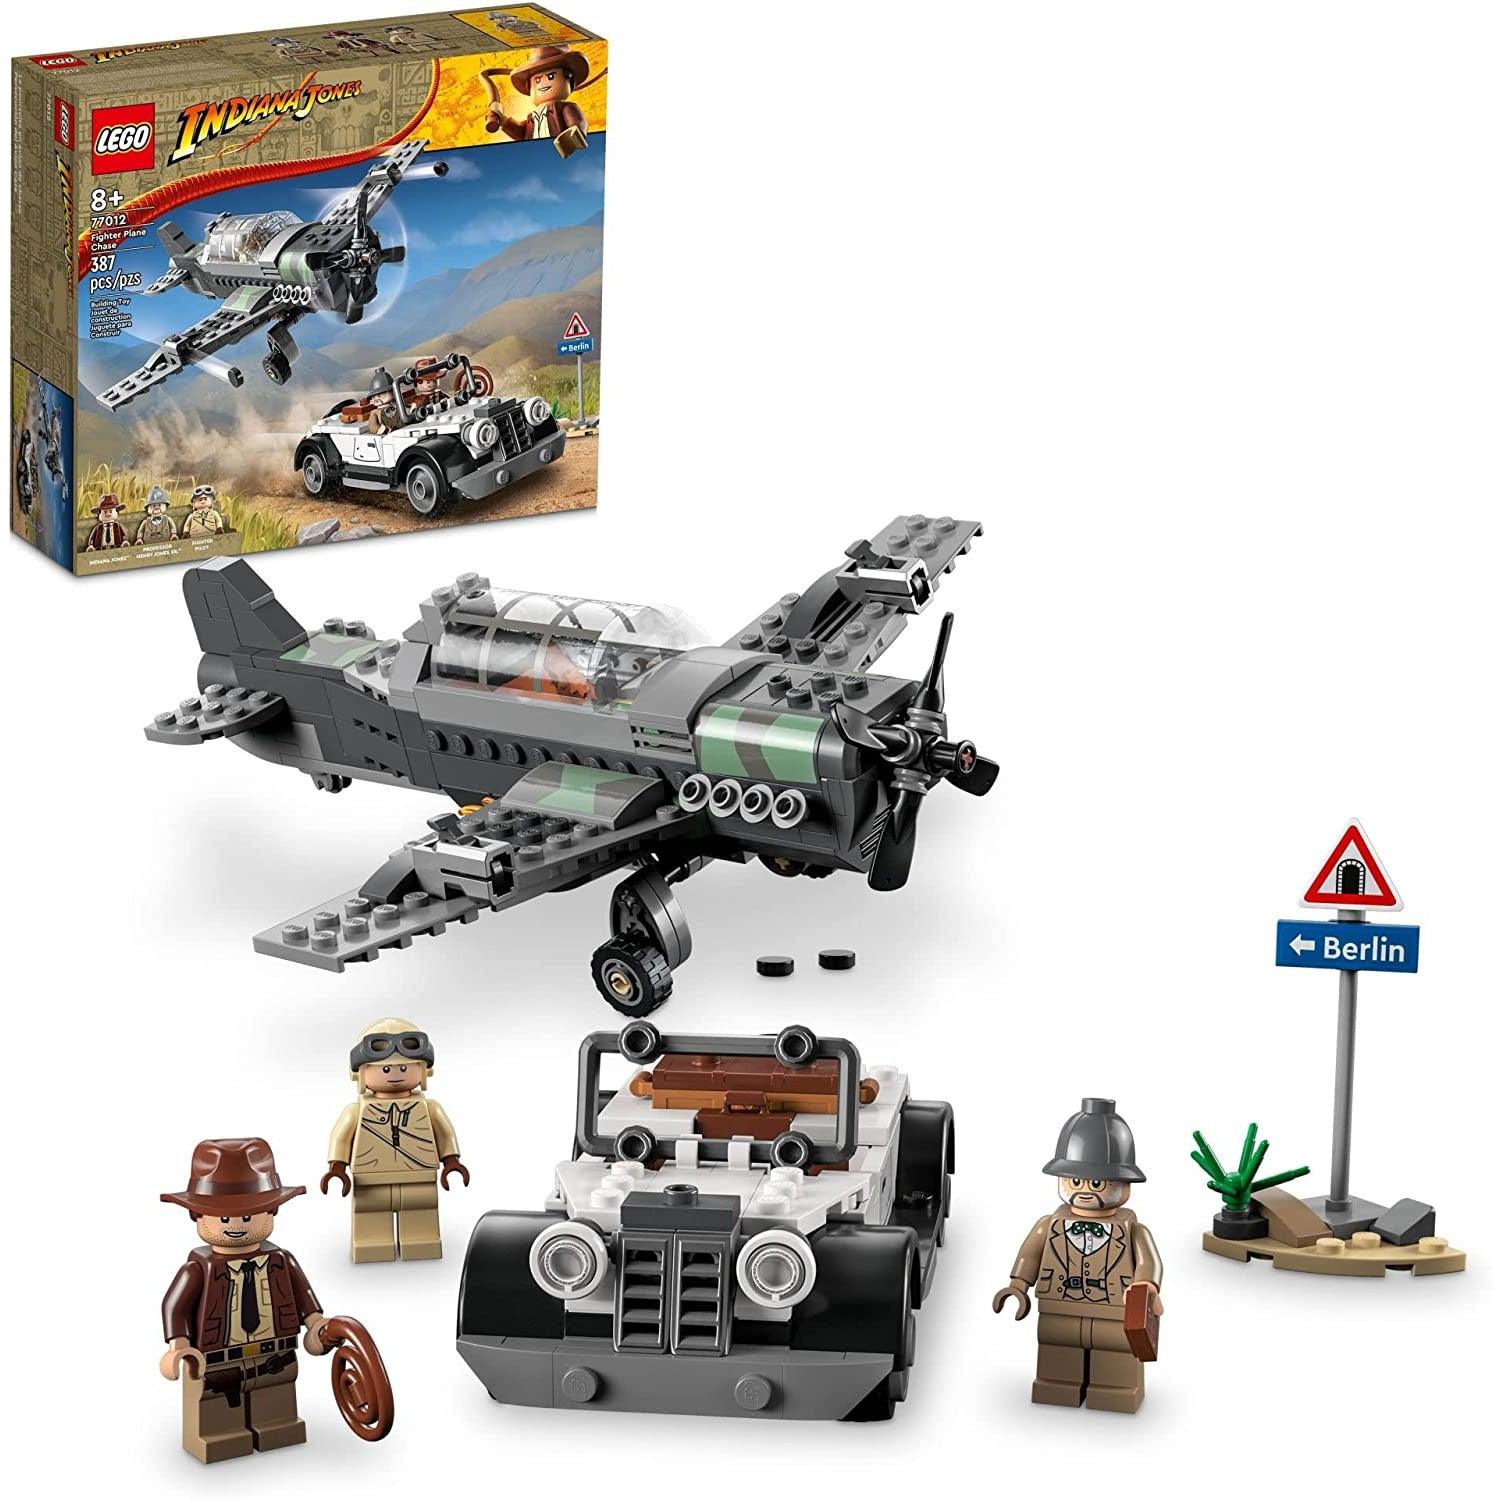 LEGO Indiana Jones and the Last Crusade Fighter Plane Chase Building Set 77012 , Featuring a Buildable Car and Airplane Toy, 3 Minifigures Including Indiana Jones, Birthday Gift for Kids 8-12 Years Old